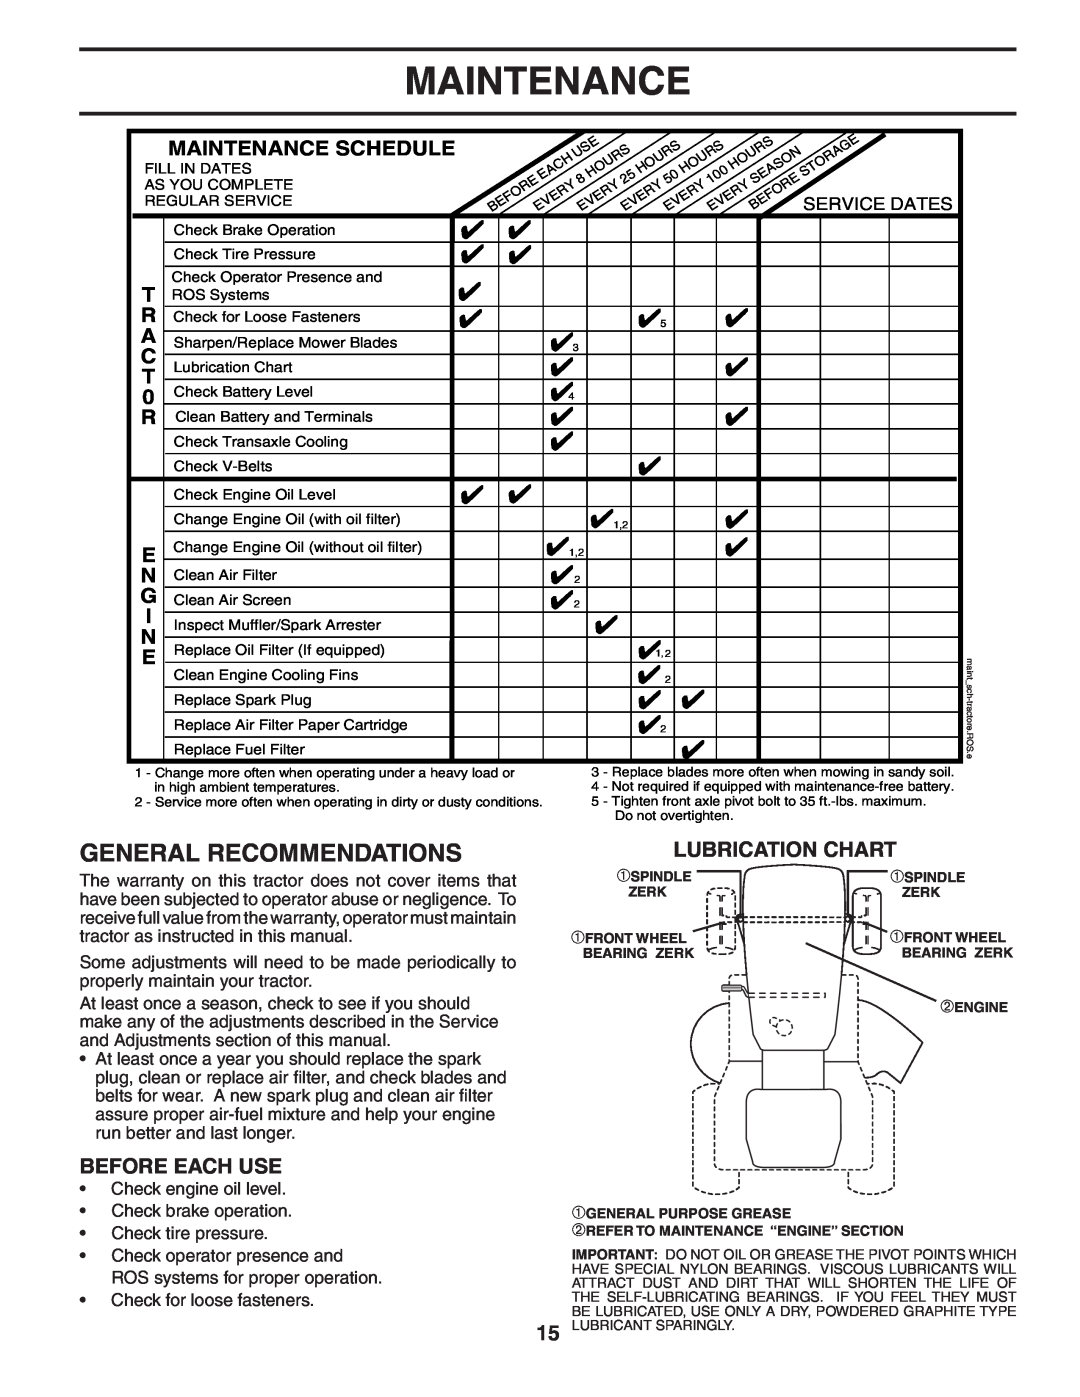 Poulan BB185H42LT manual General Recommendations, Lubrication Chart, Before Each Use, Maintenance Schedule 